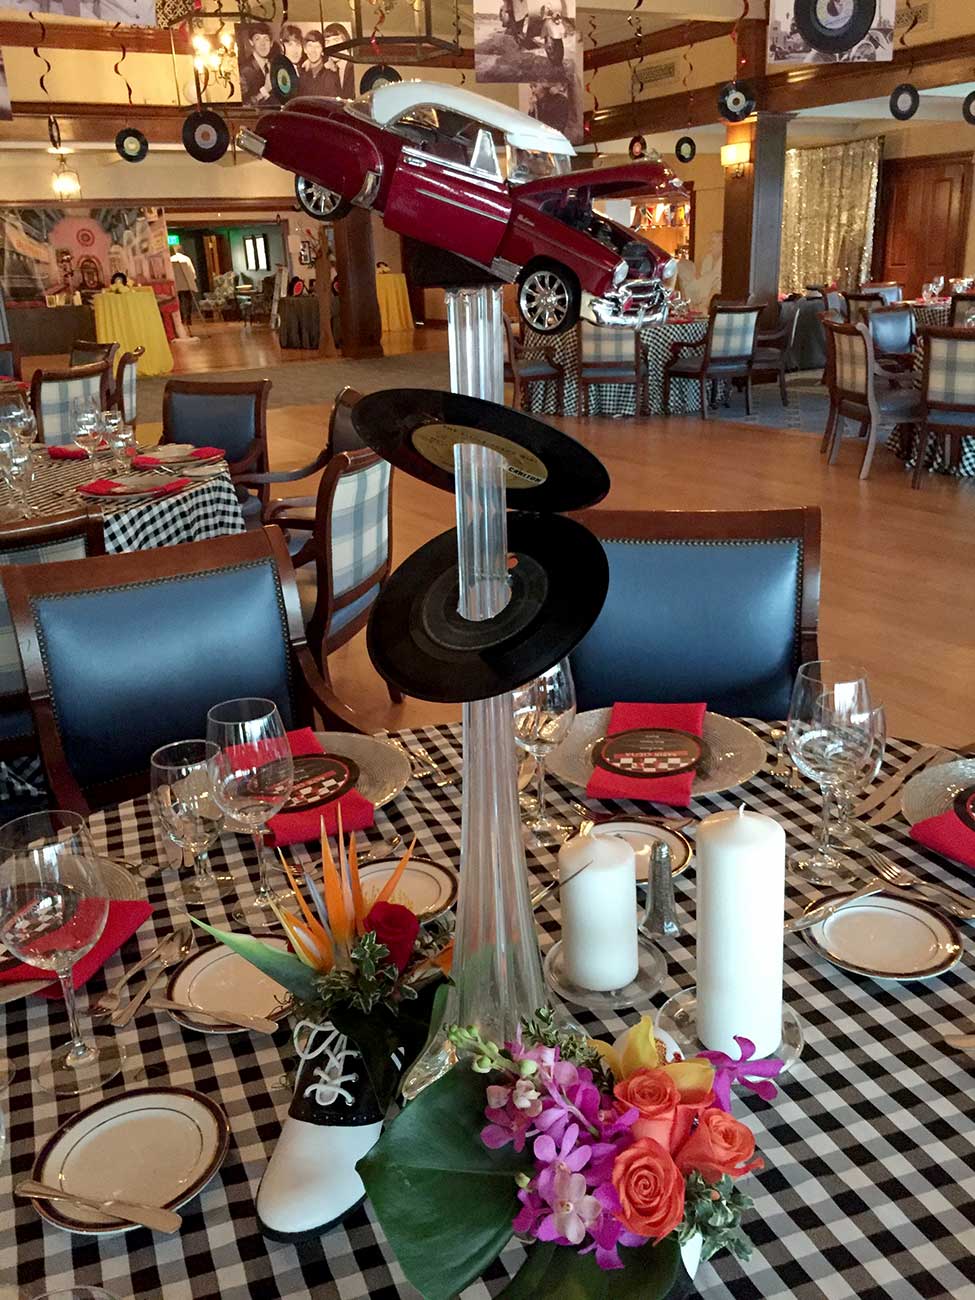 Tabletop decor in a 50's theme with dinnerware, crystal and a 50's car and record floral centerpiece